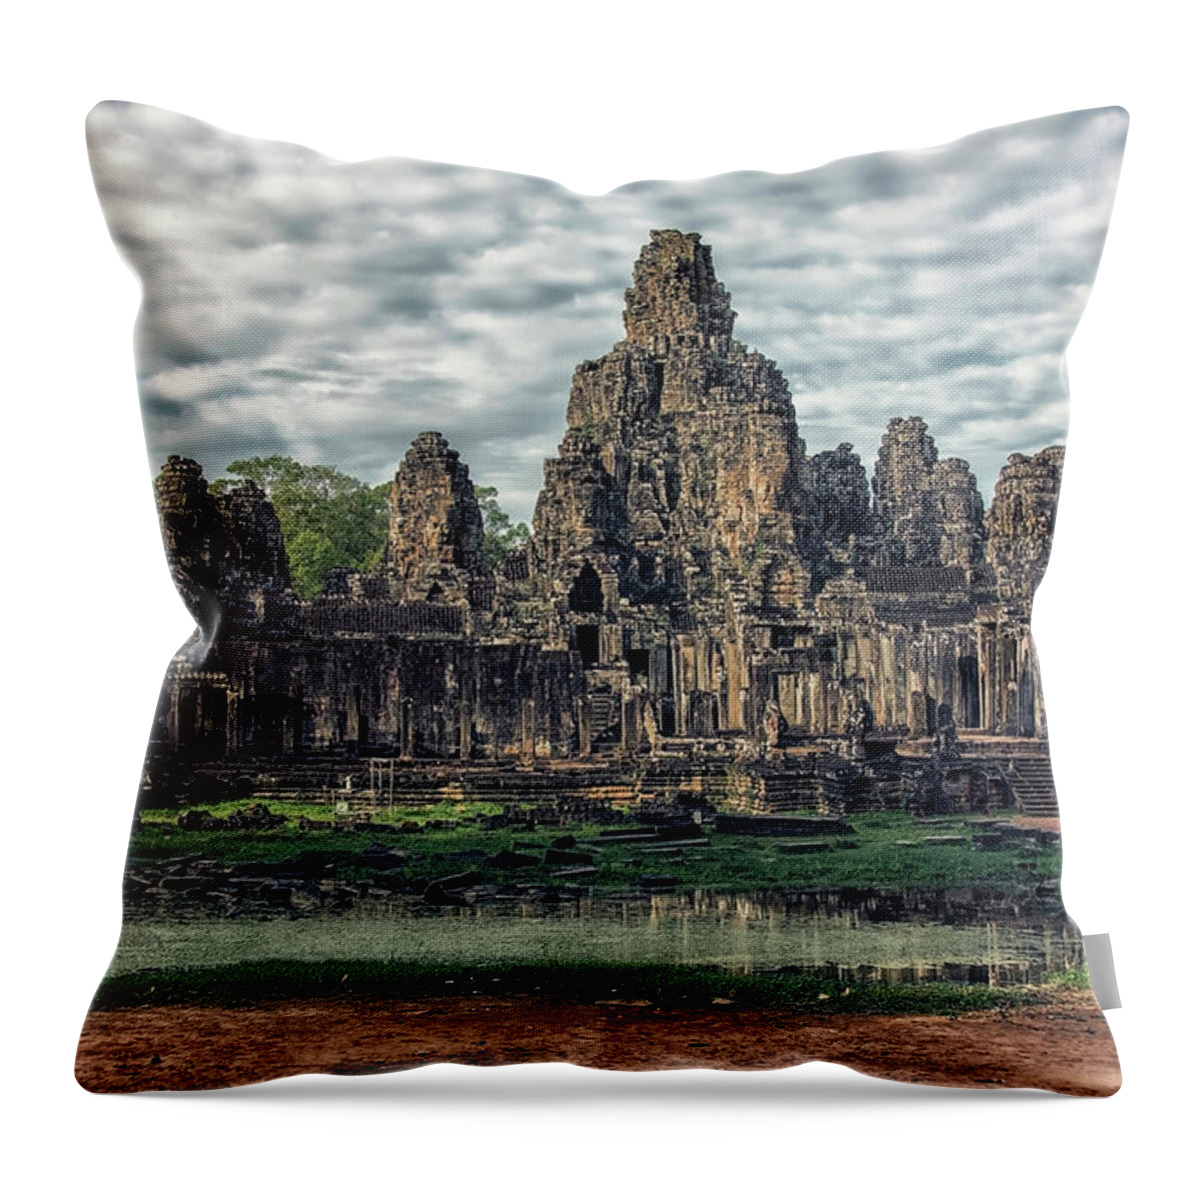 Ancient Throw Pillow featuring the photograph Angkor Thom by Manjik Pictures